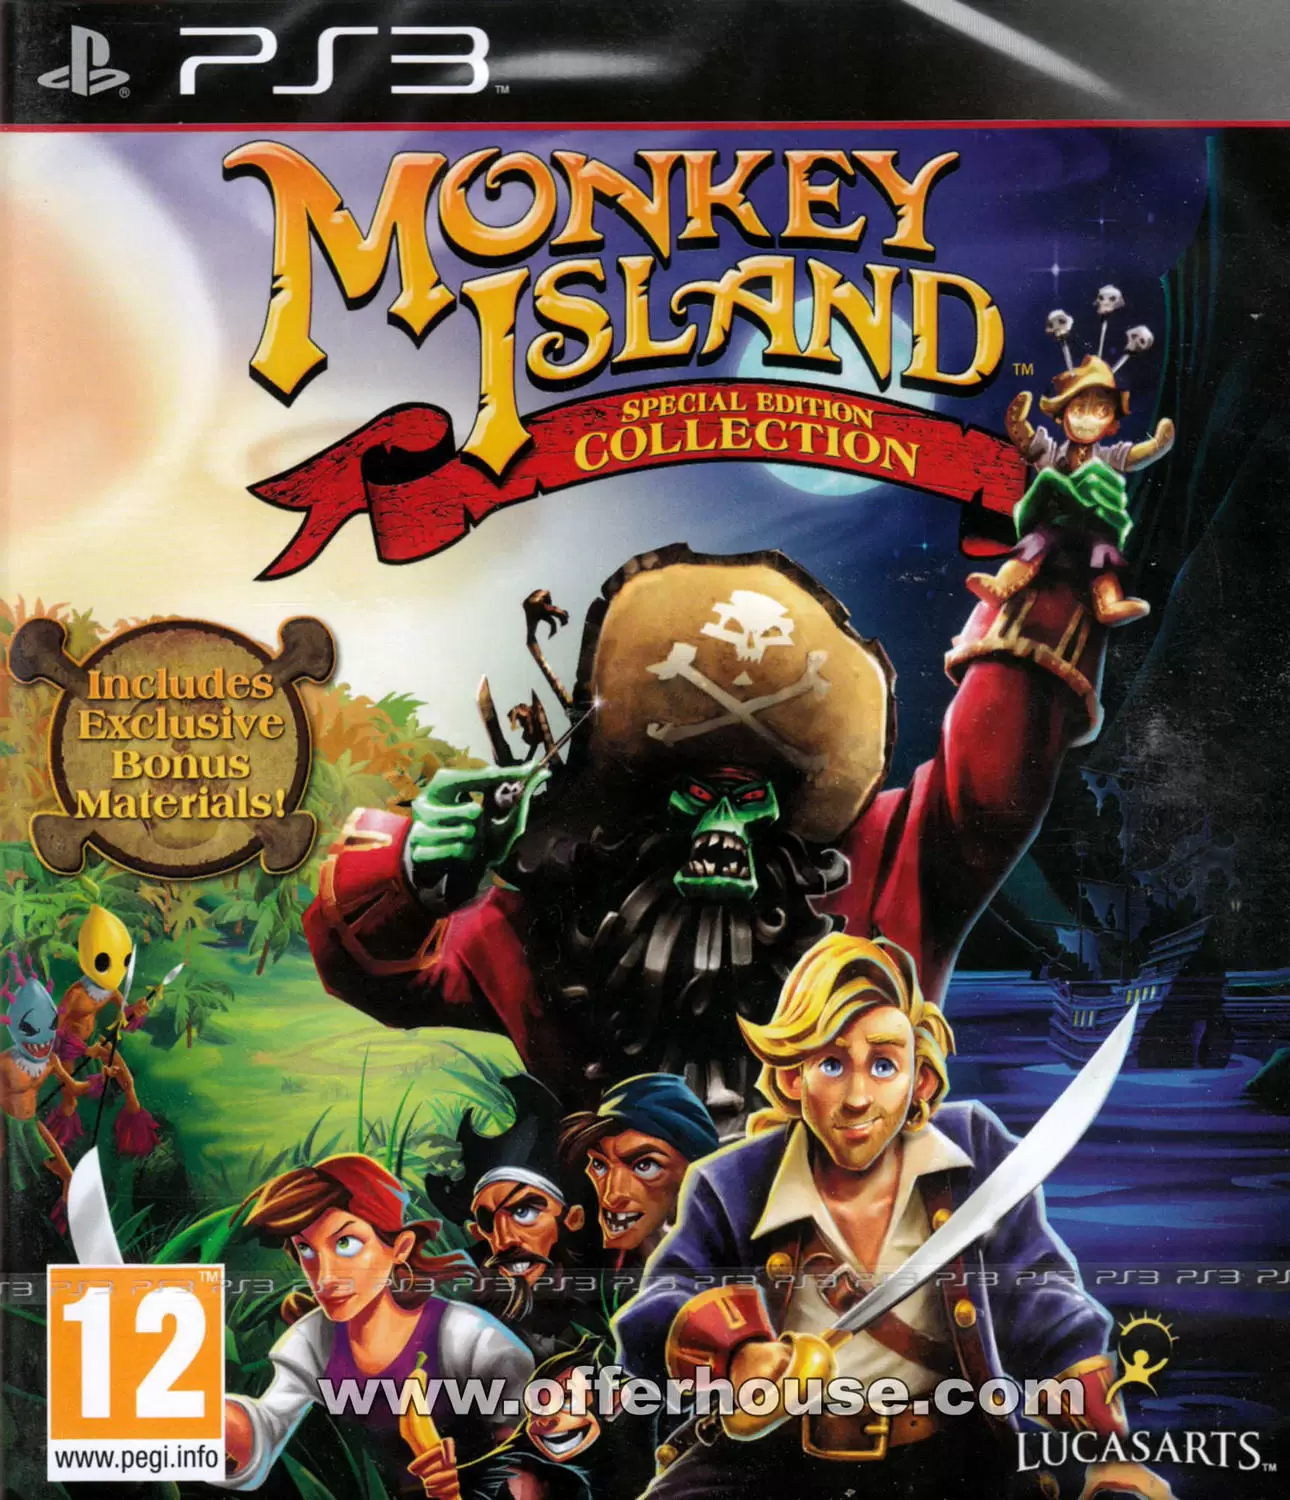 PS3 Games - Monkey Island Special Edition Collection